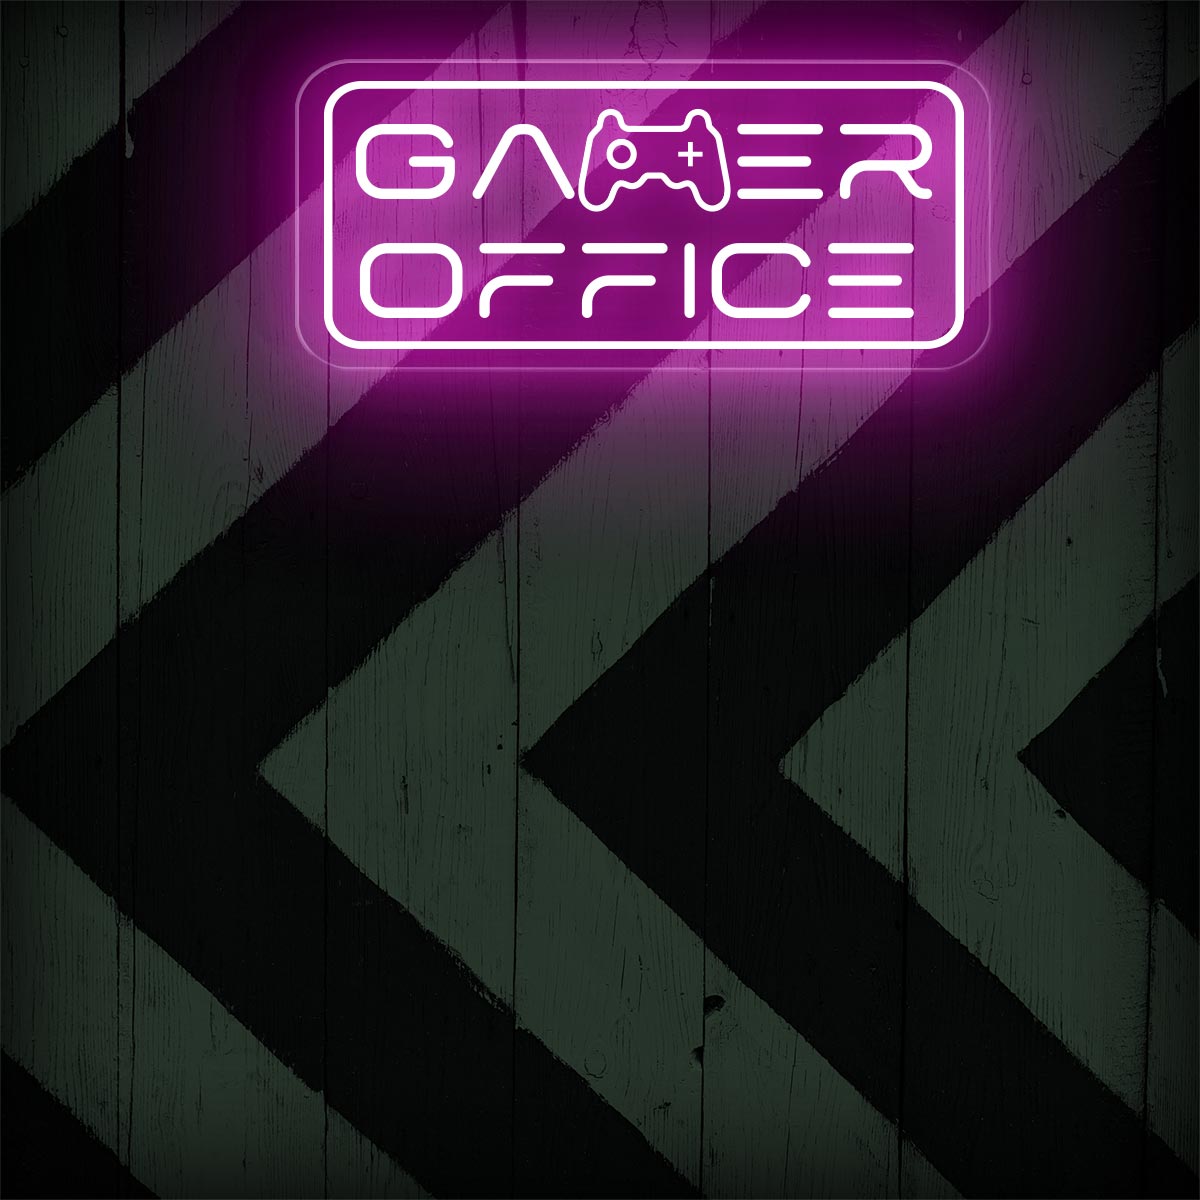 Gamer Office Neon Sign - Illuminate Your Workspace with Style - NEONXPERT